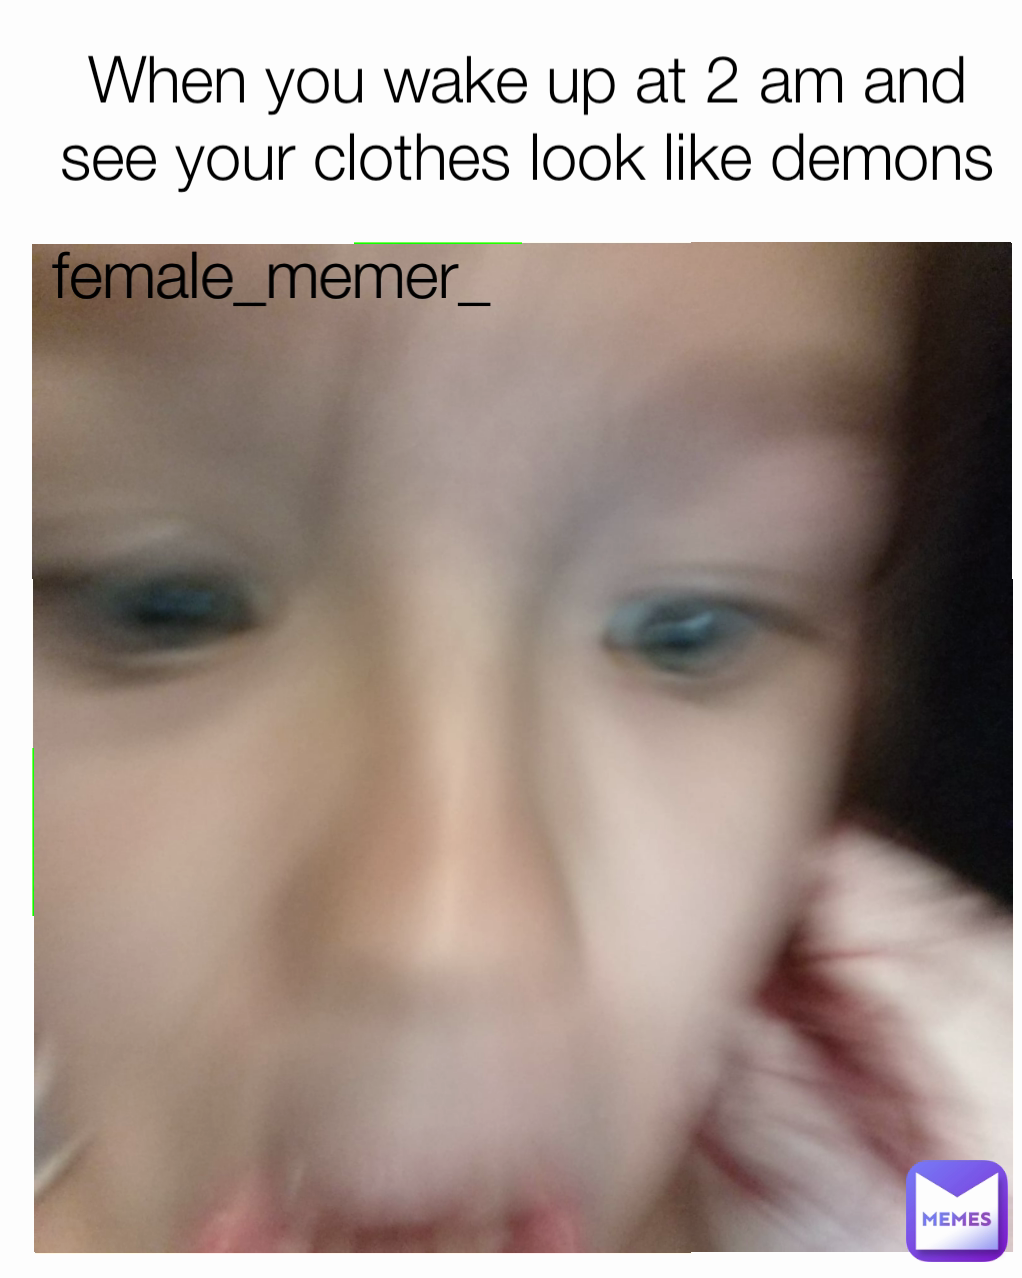 female_memer_ When you wake up at 2 am and see your clothes look like demons